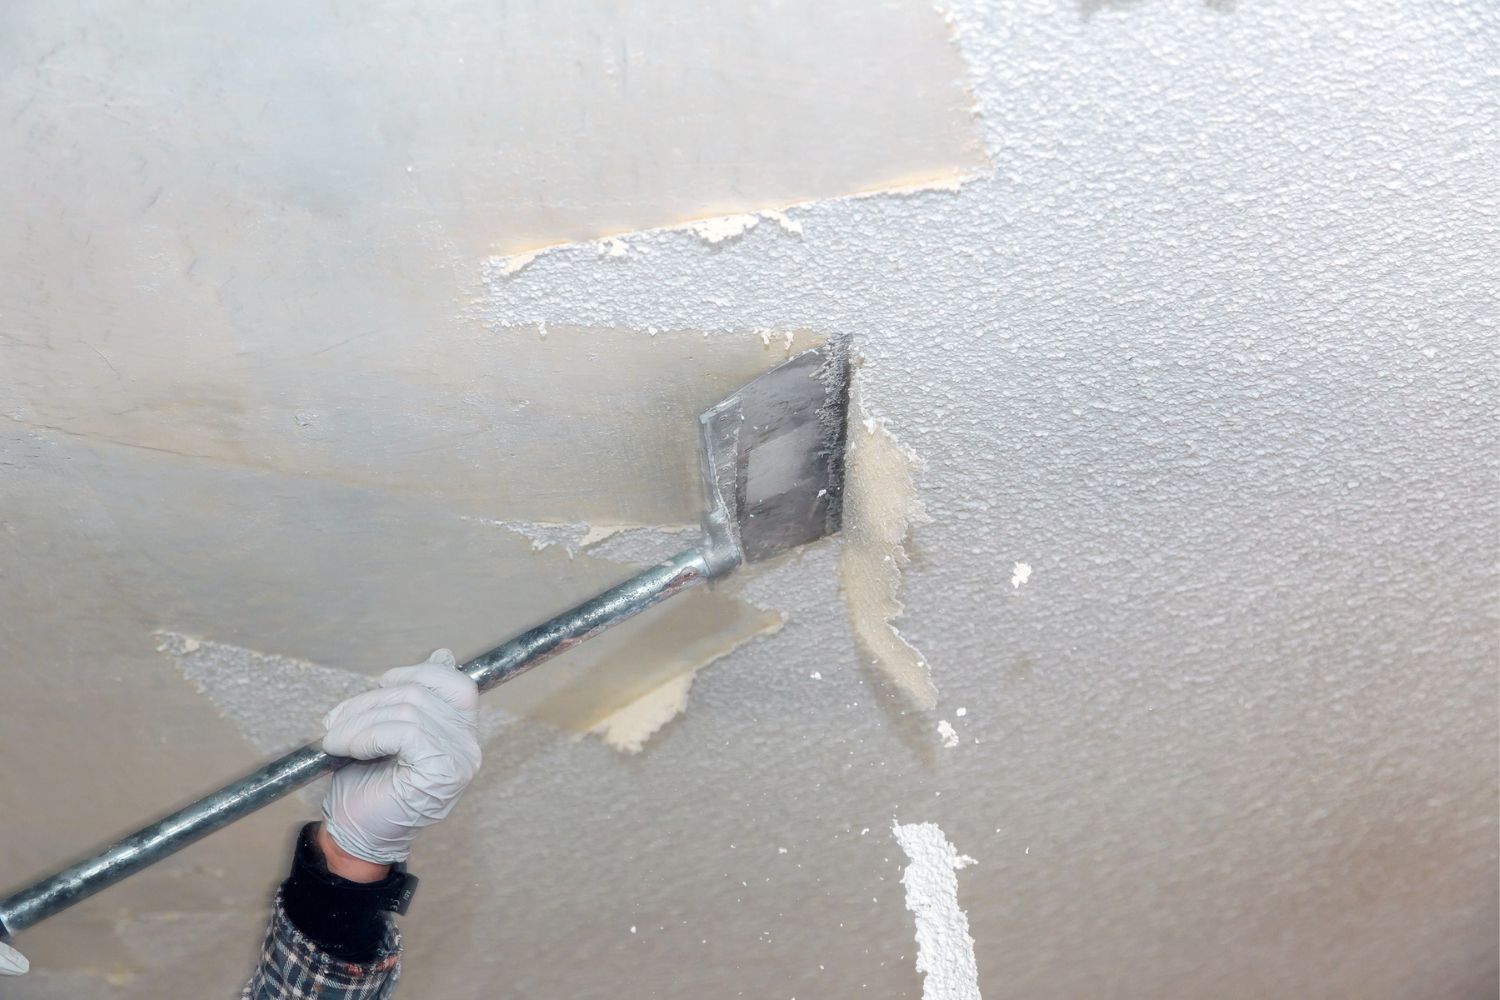 Popcorn Ceiling Removal Cost